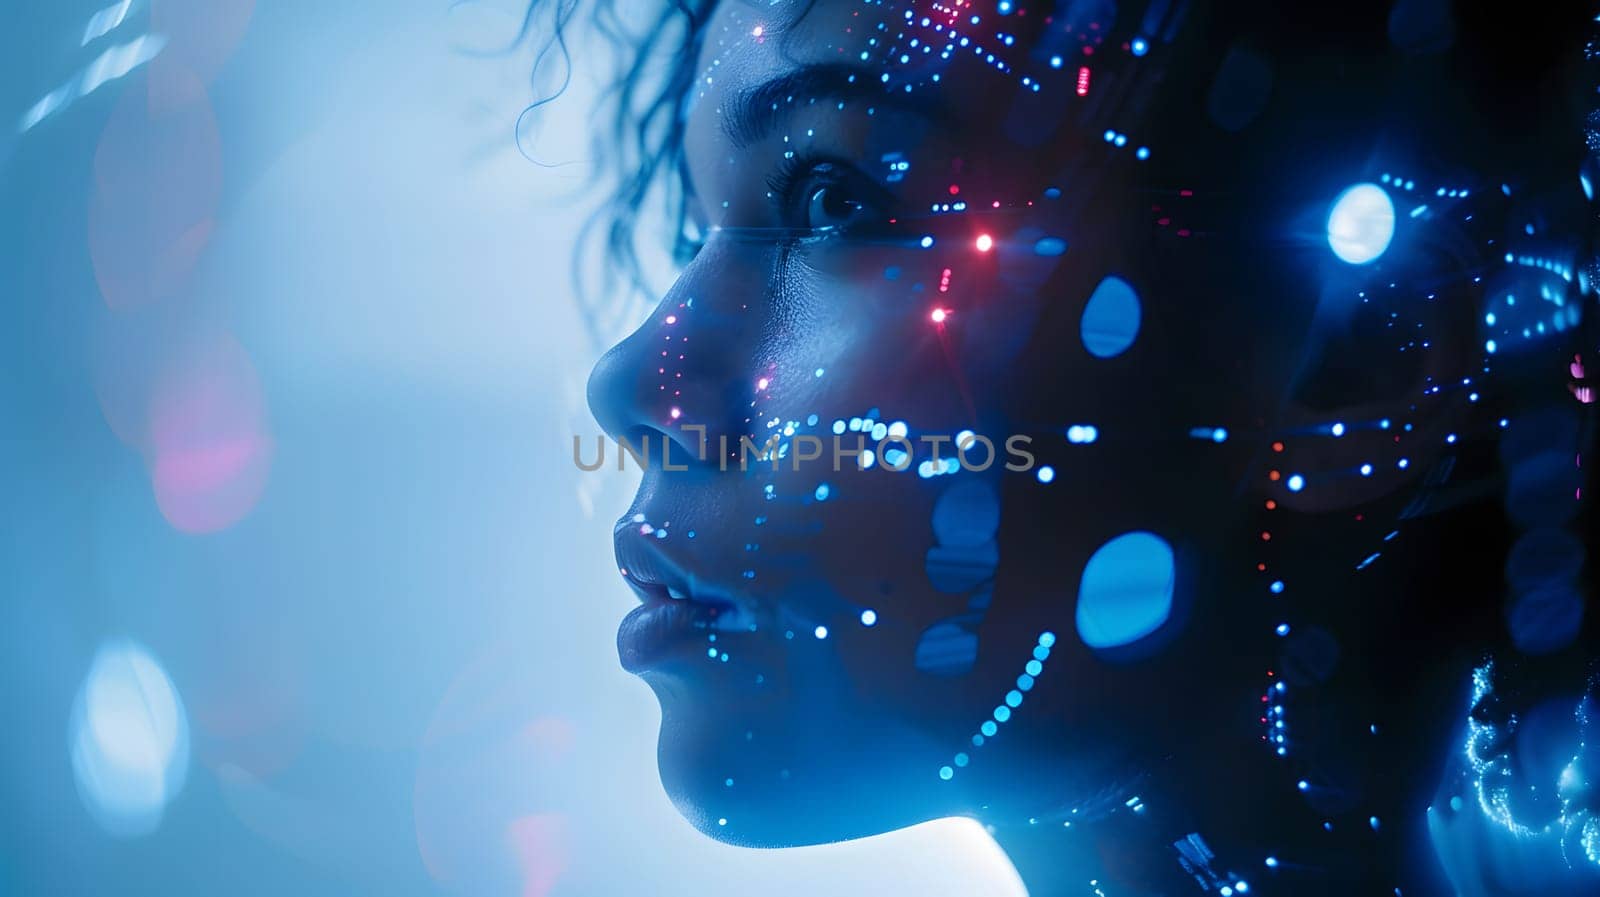 A macro photography shot of a womans face with glowing electric blue lights, creating a mesmerizing and futuristic art piece in the darkness